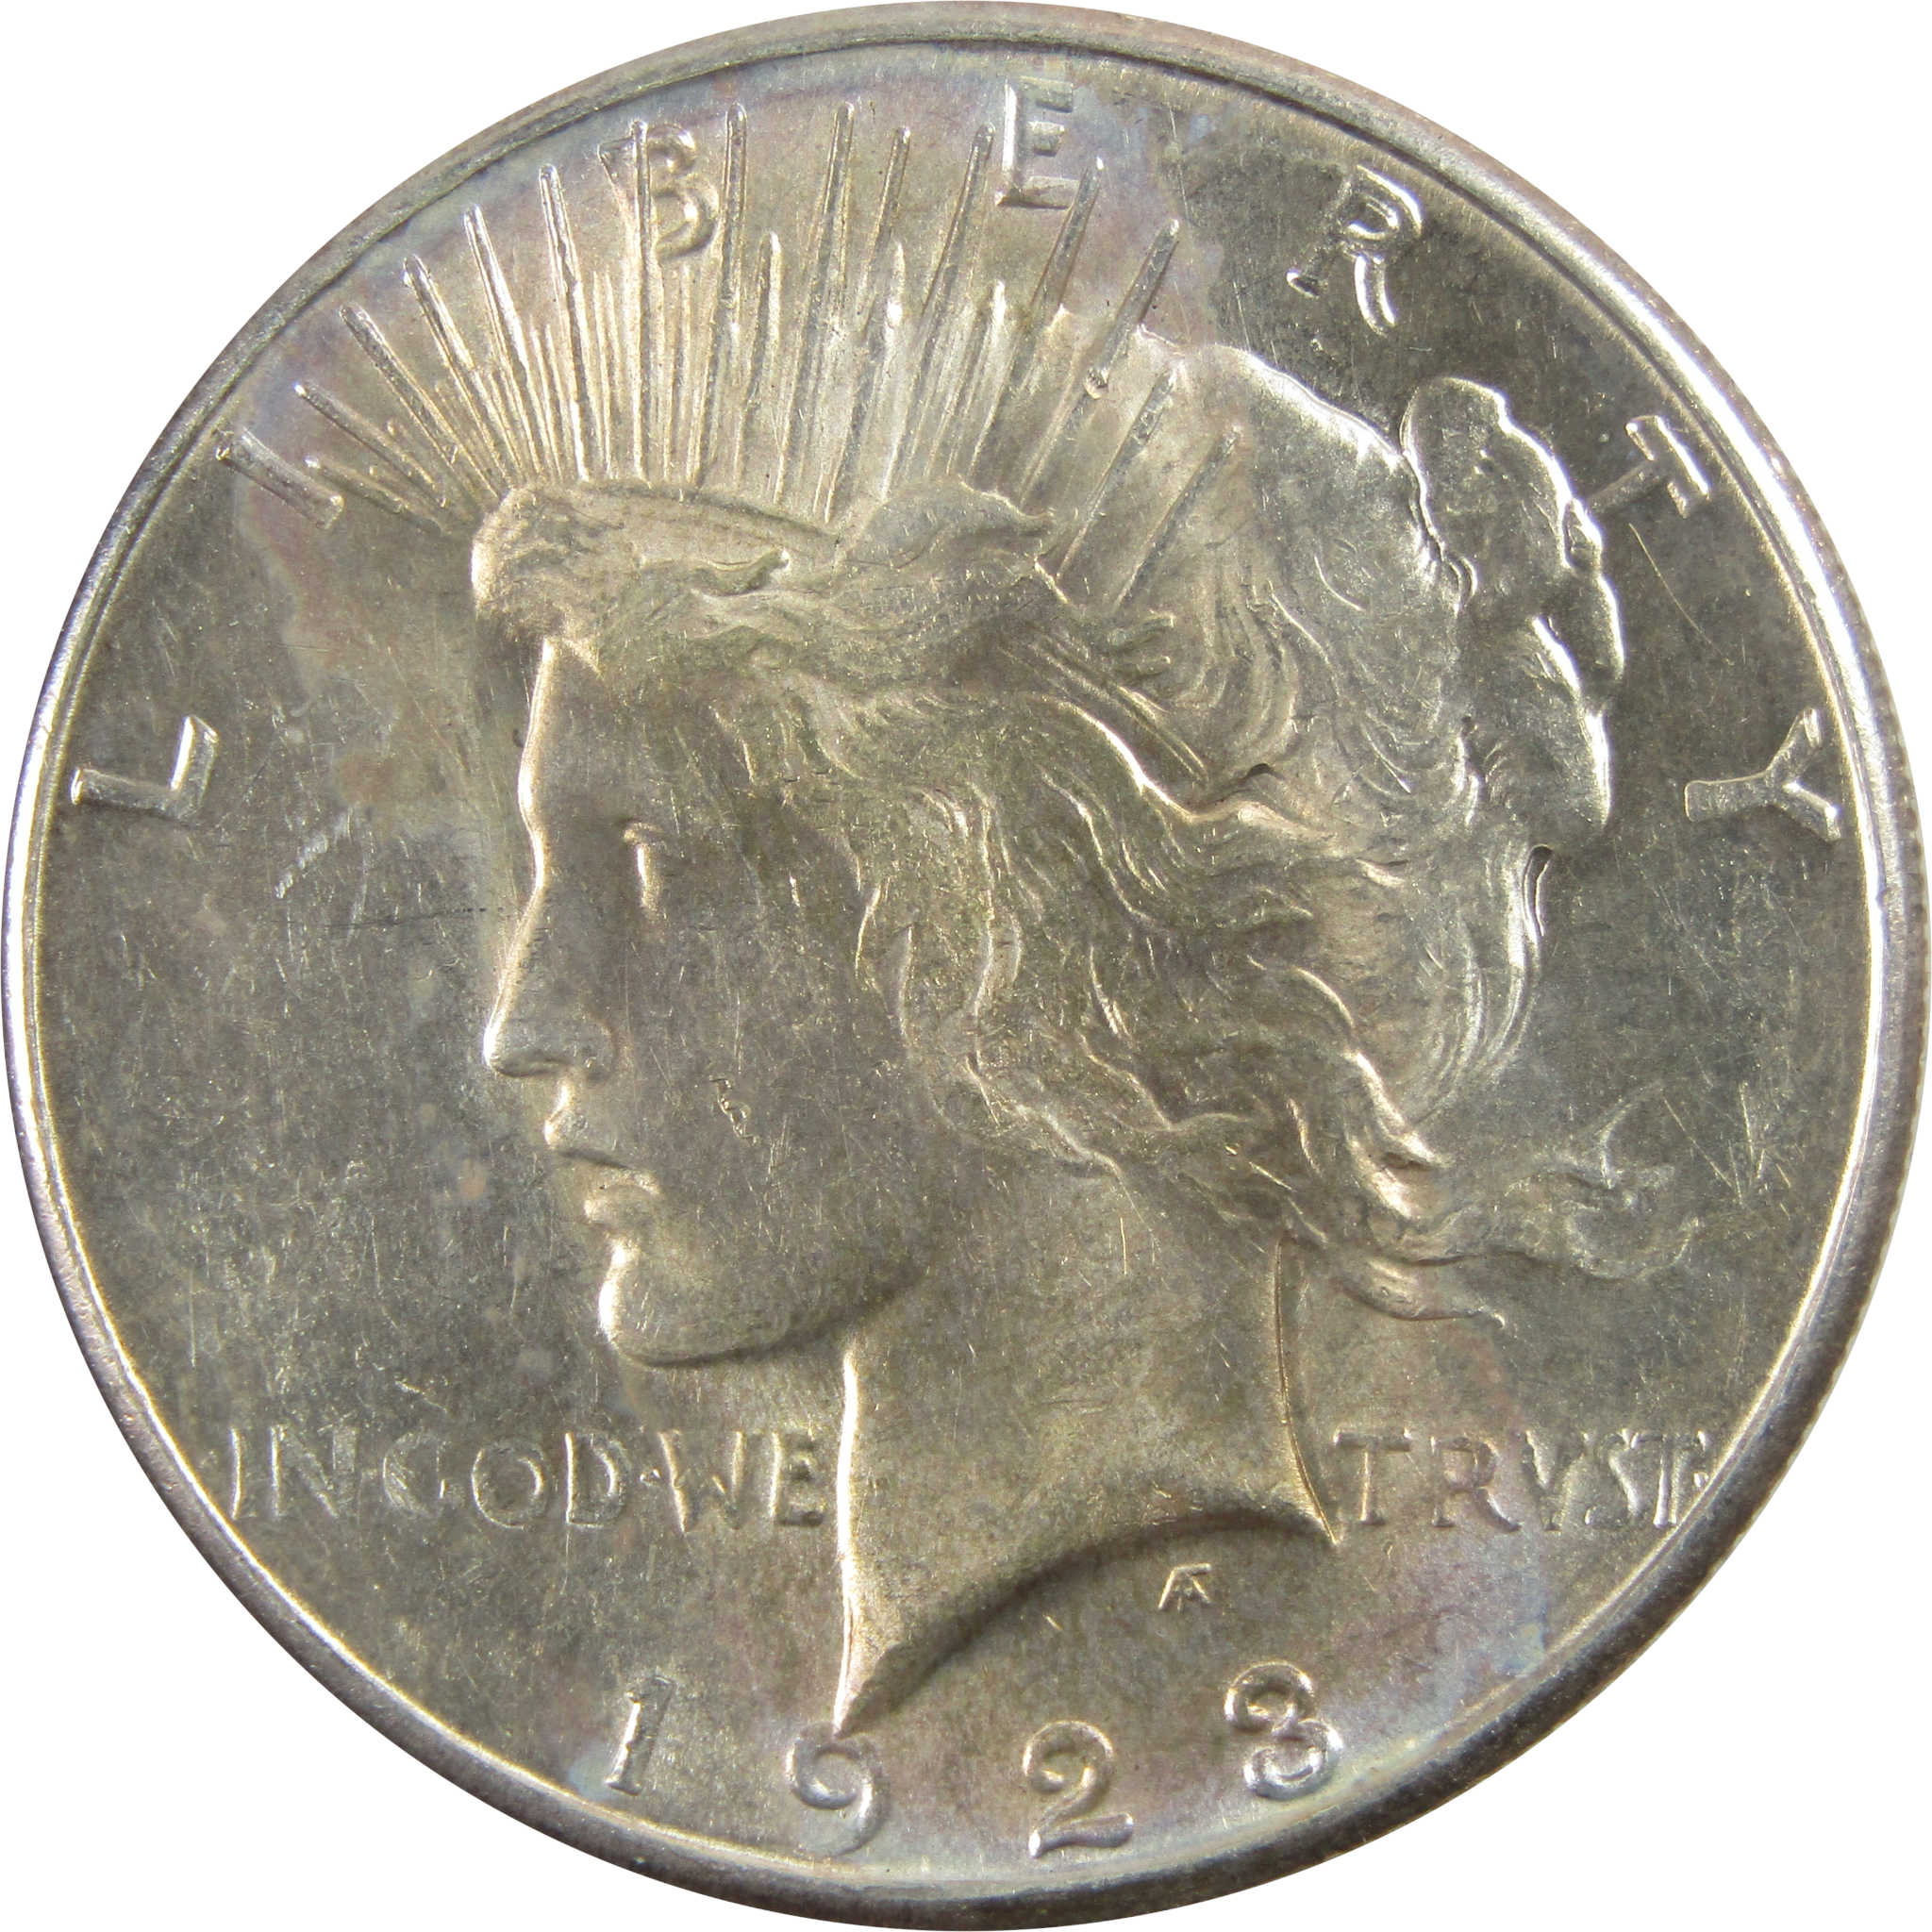 1923 S Peace Dollar AU About Uncirculated 90% Silver $1 Coin SKU:I5392